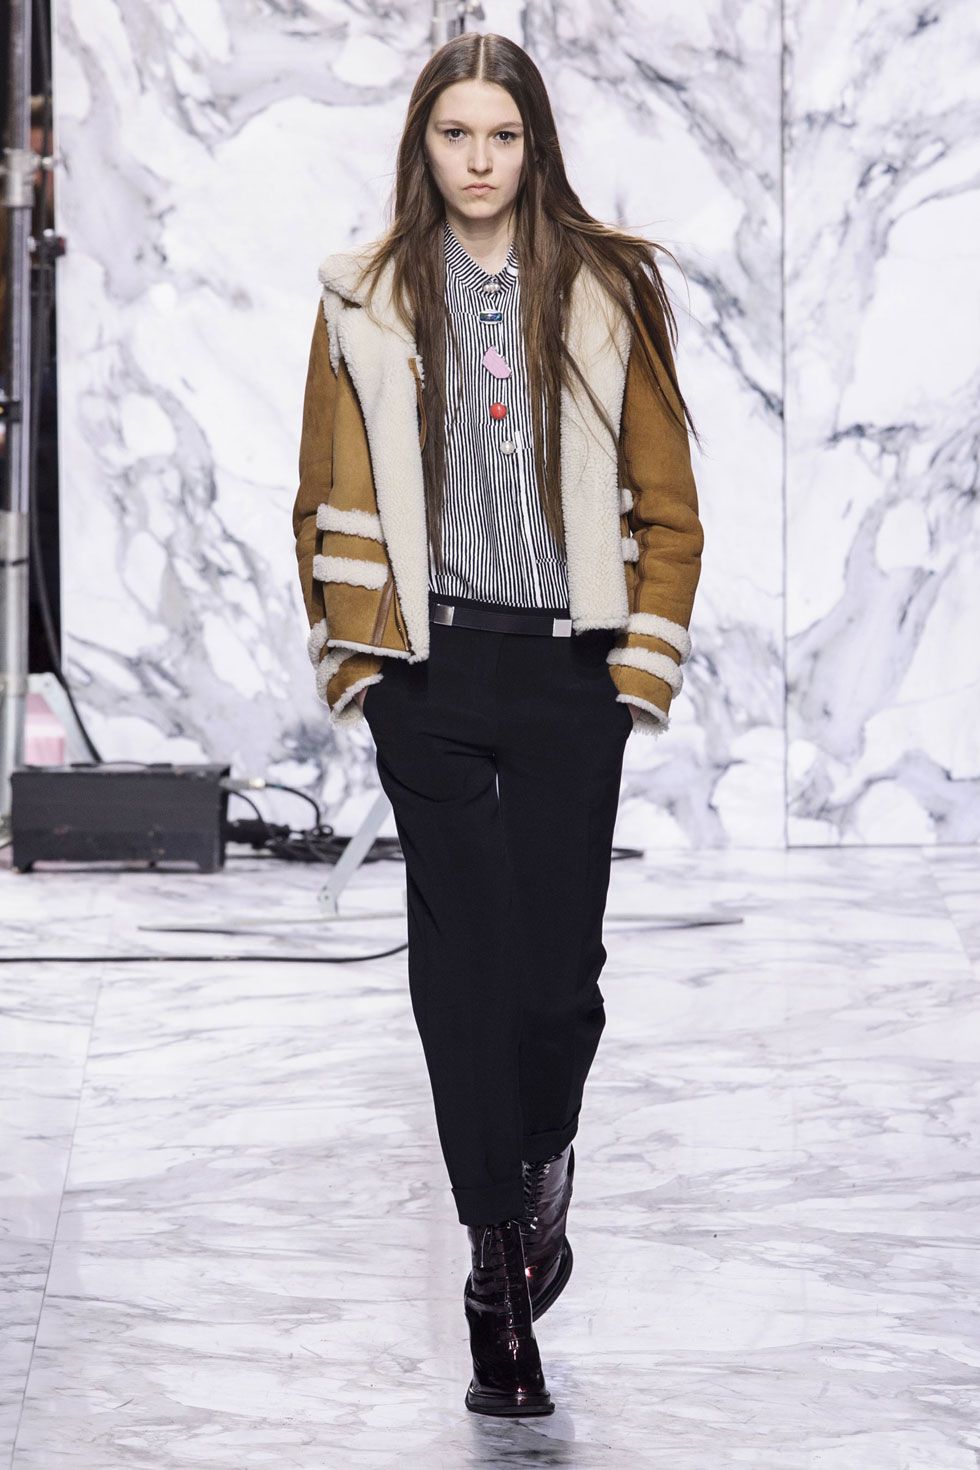 All the Looks From the Louis Vuitton Fall 2016 Ready-to-Wear Show